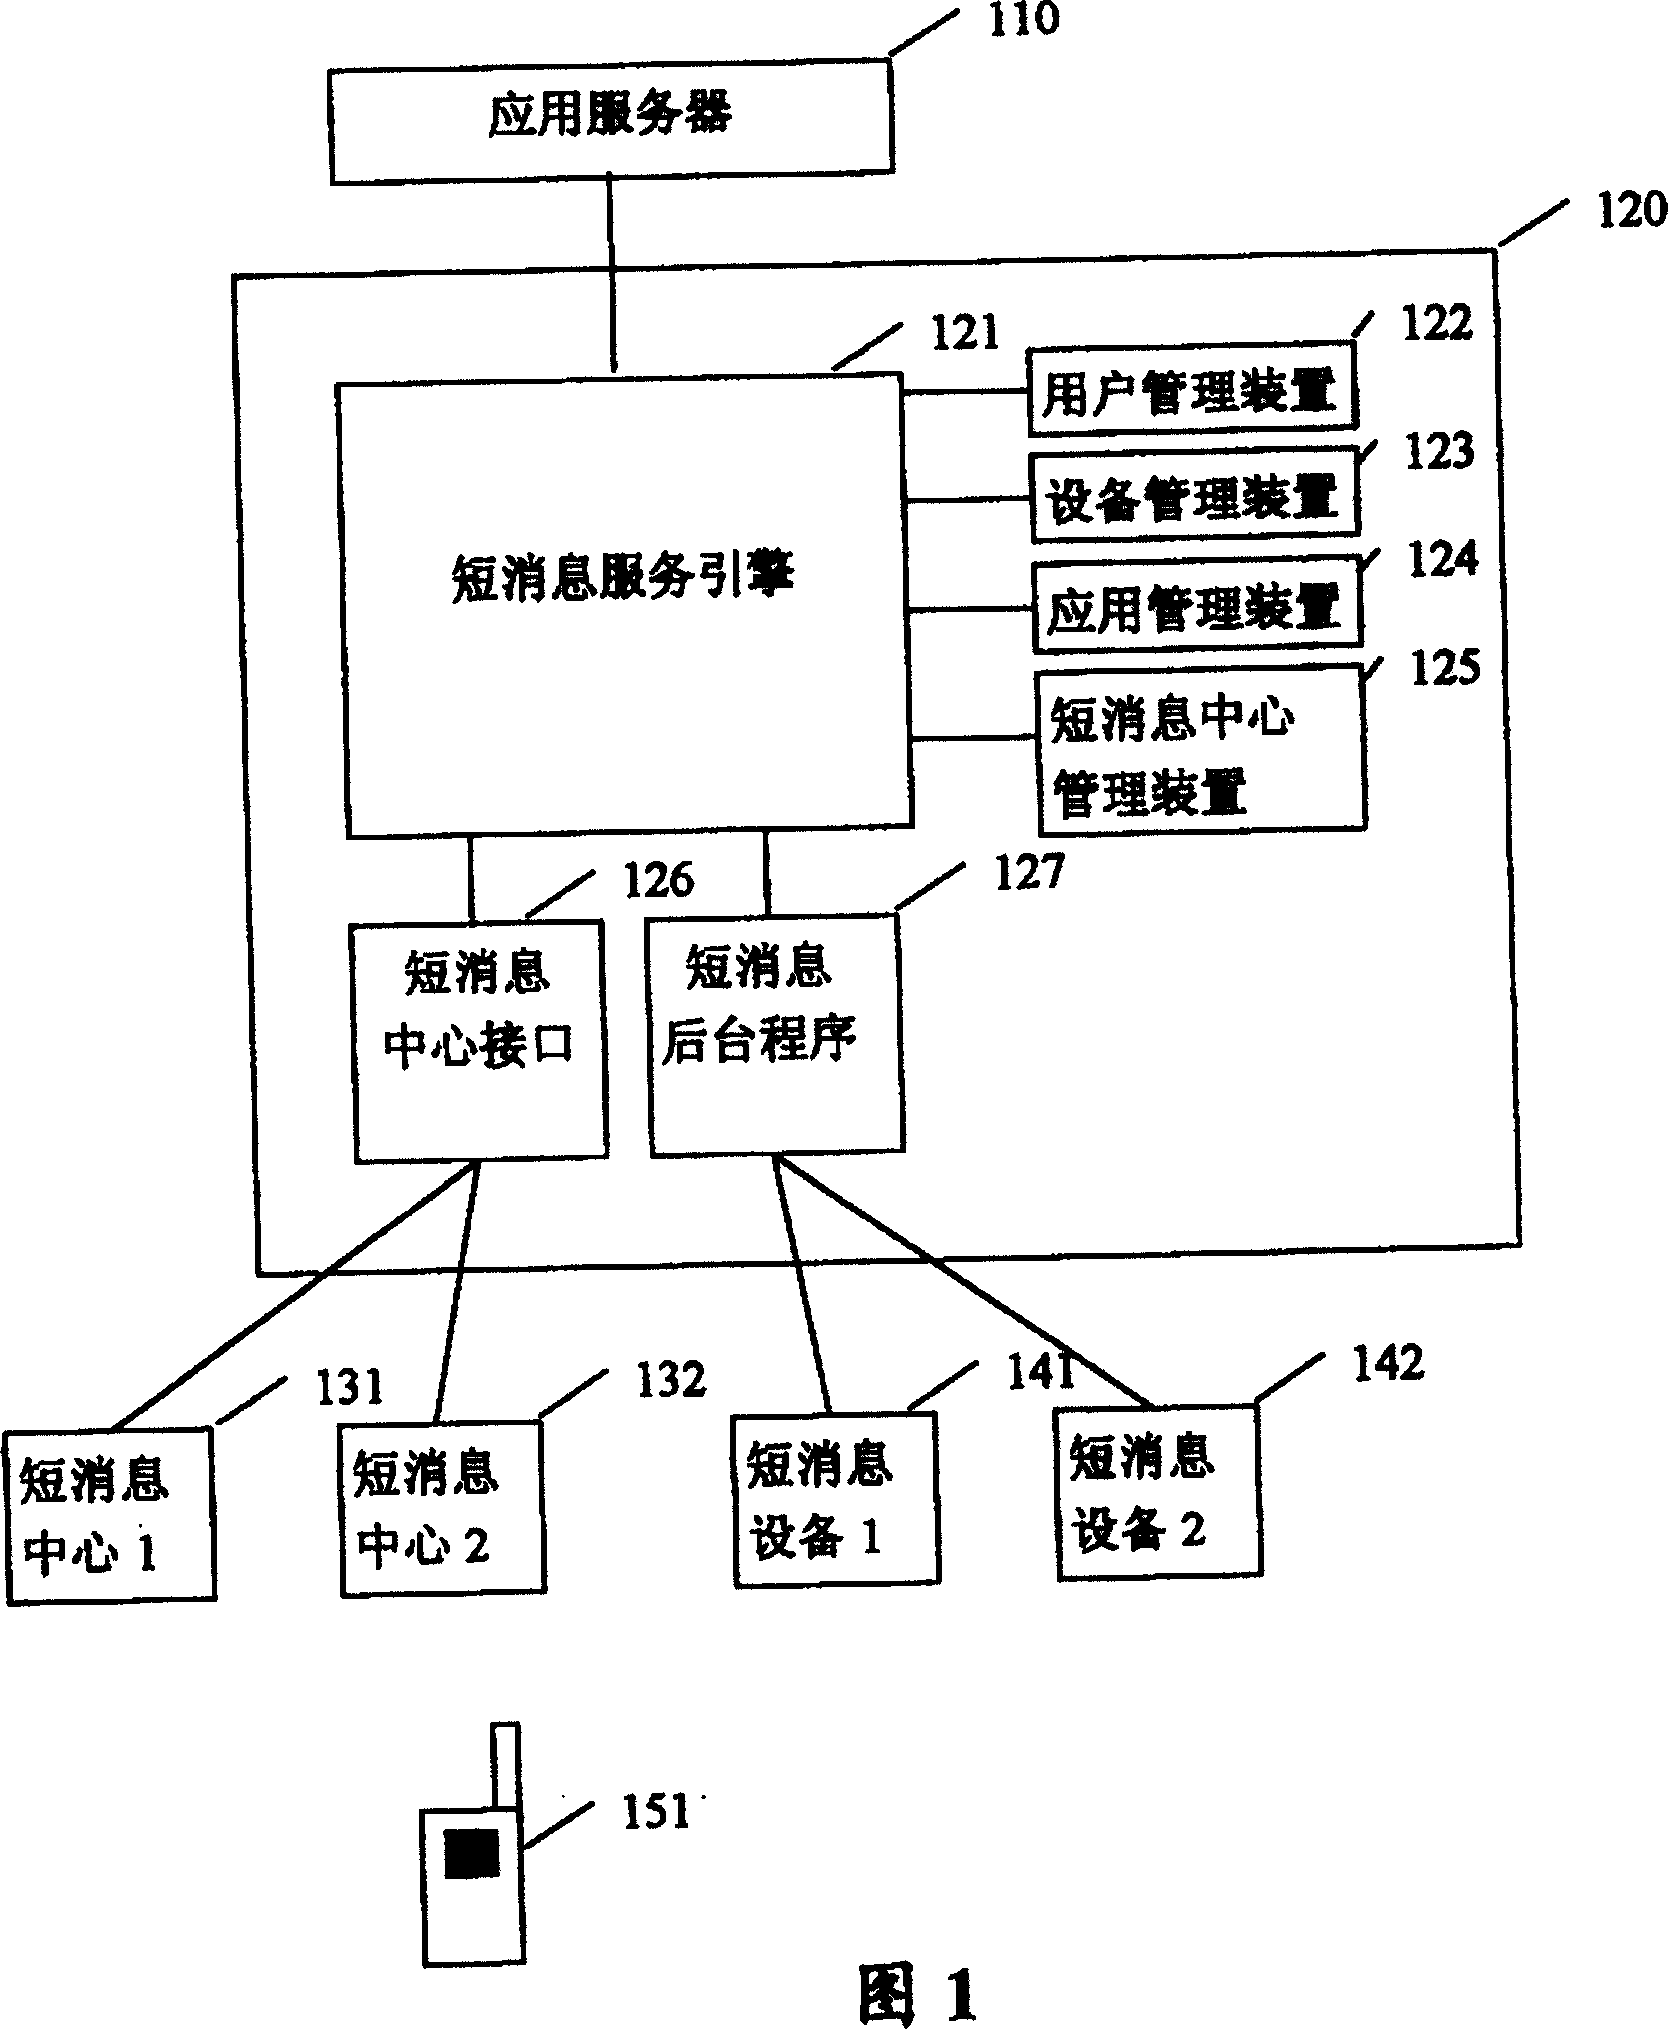 Short message gateway, system and method for providing mobile phone with information service